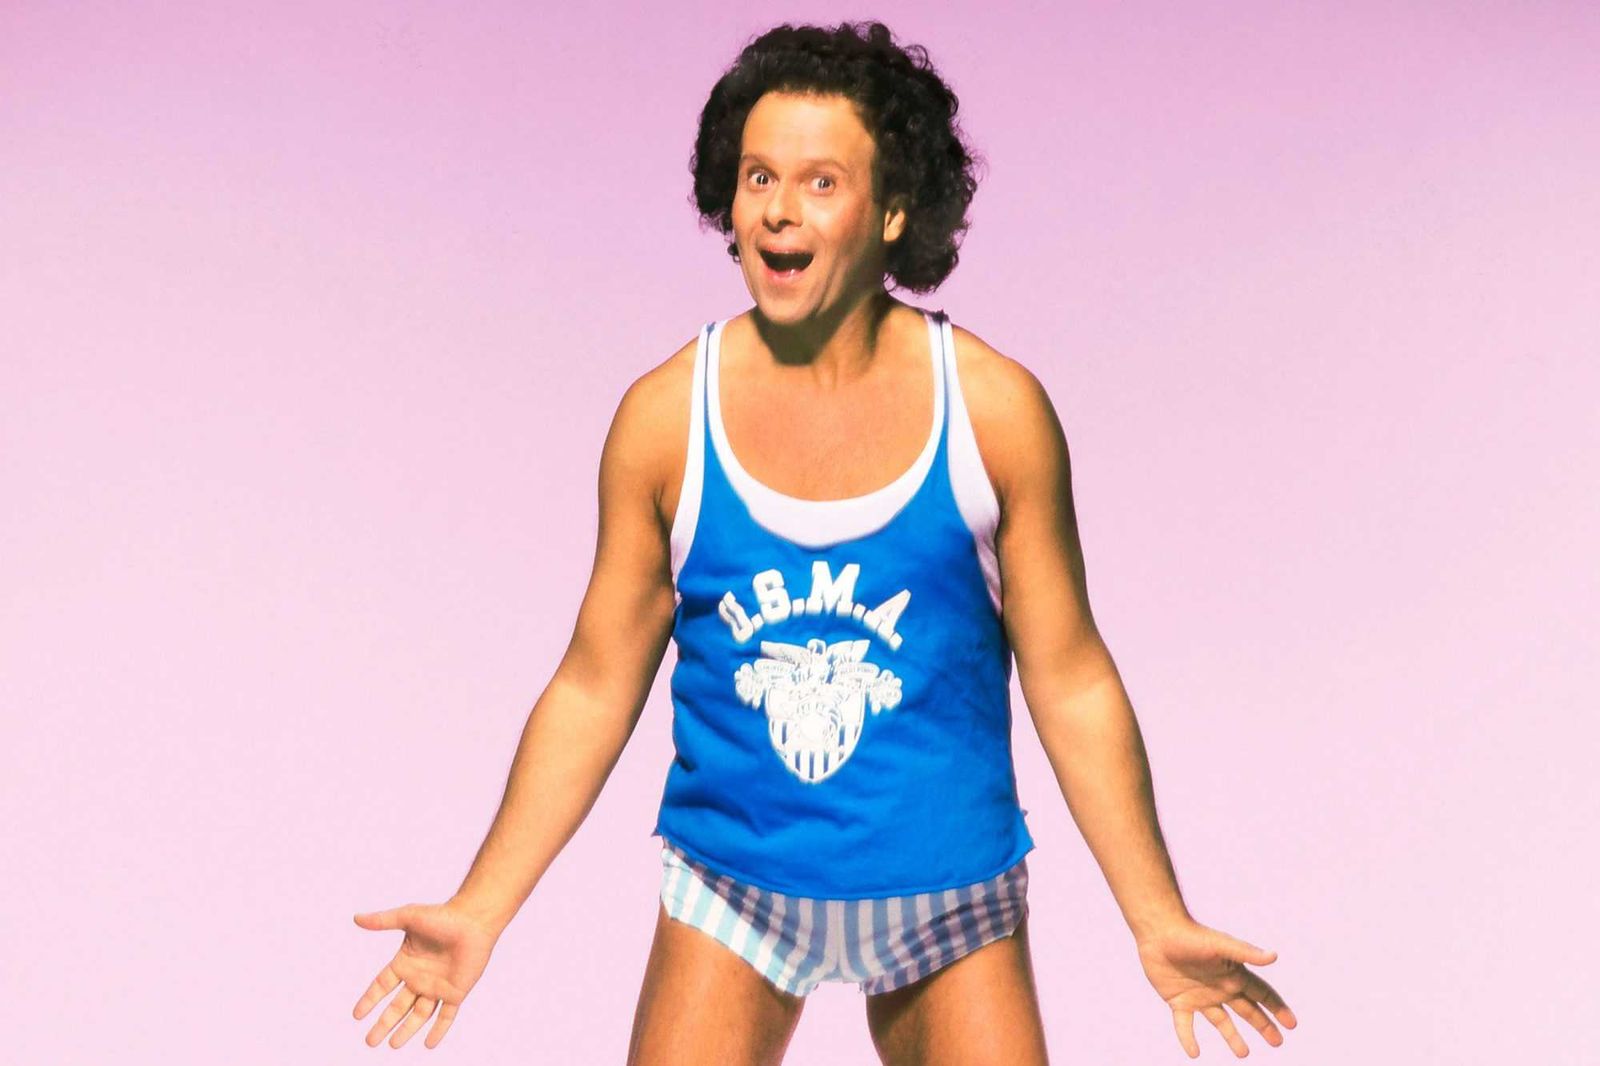 'Something’s broken inside because he did it' - The heartache behind Richard Simmons' retreat from public life